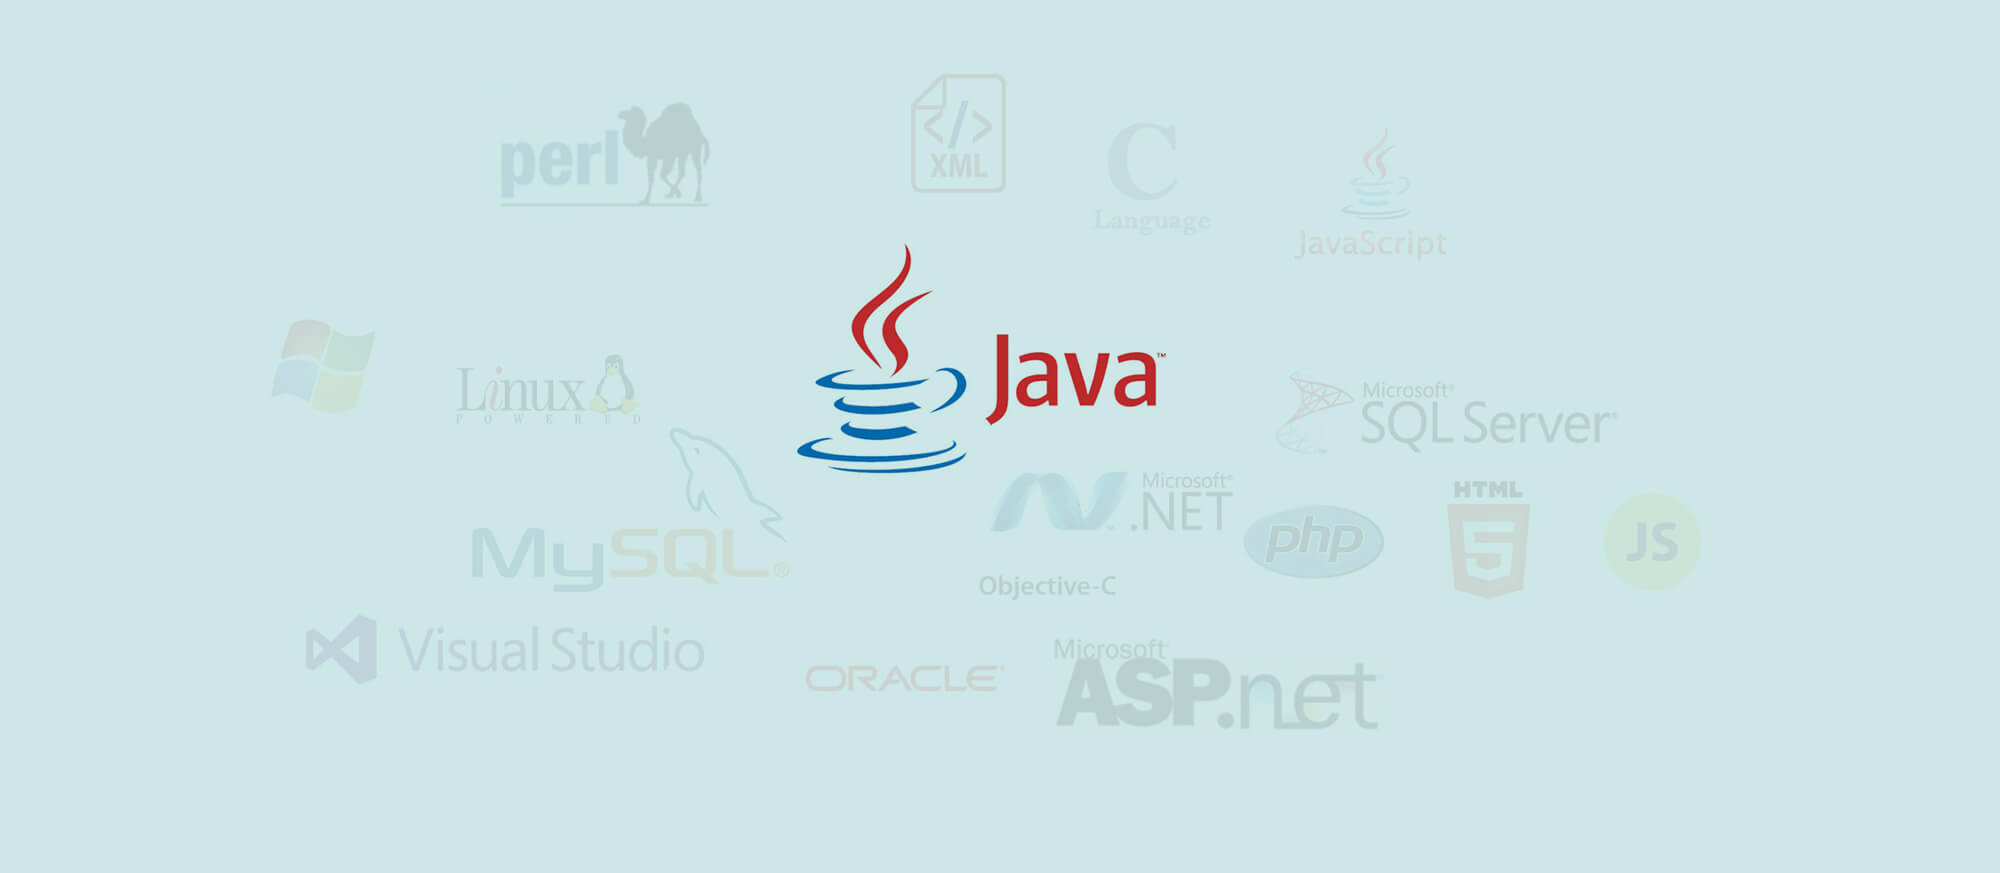 Sunnet has the experience to assist with Java programming.